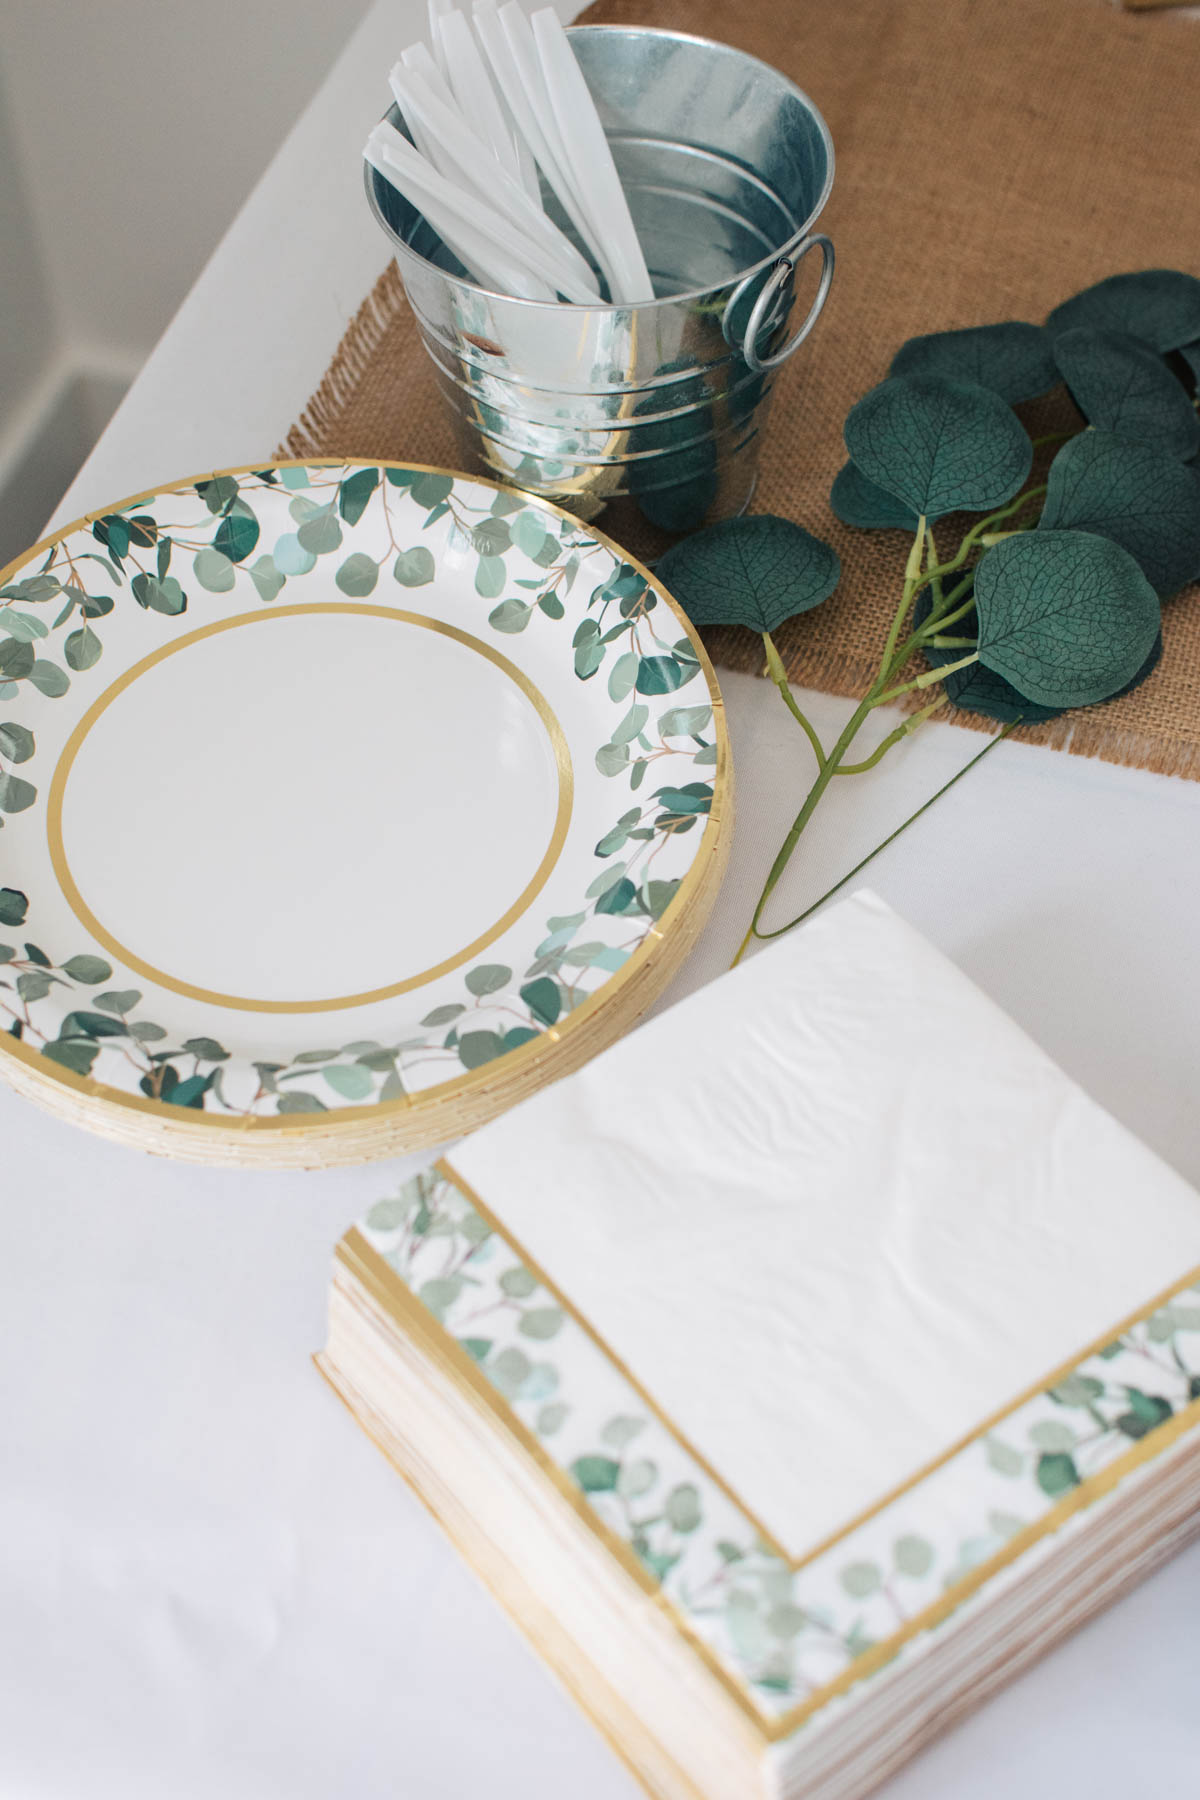 Stack of eucalyptus plates and napkins on table with white table cloth.